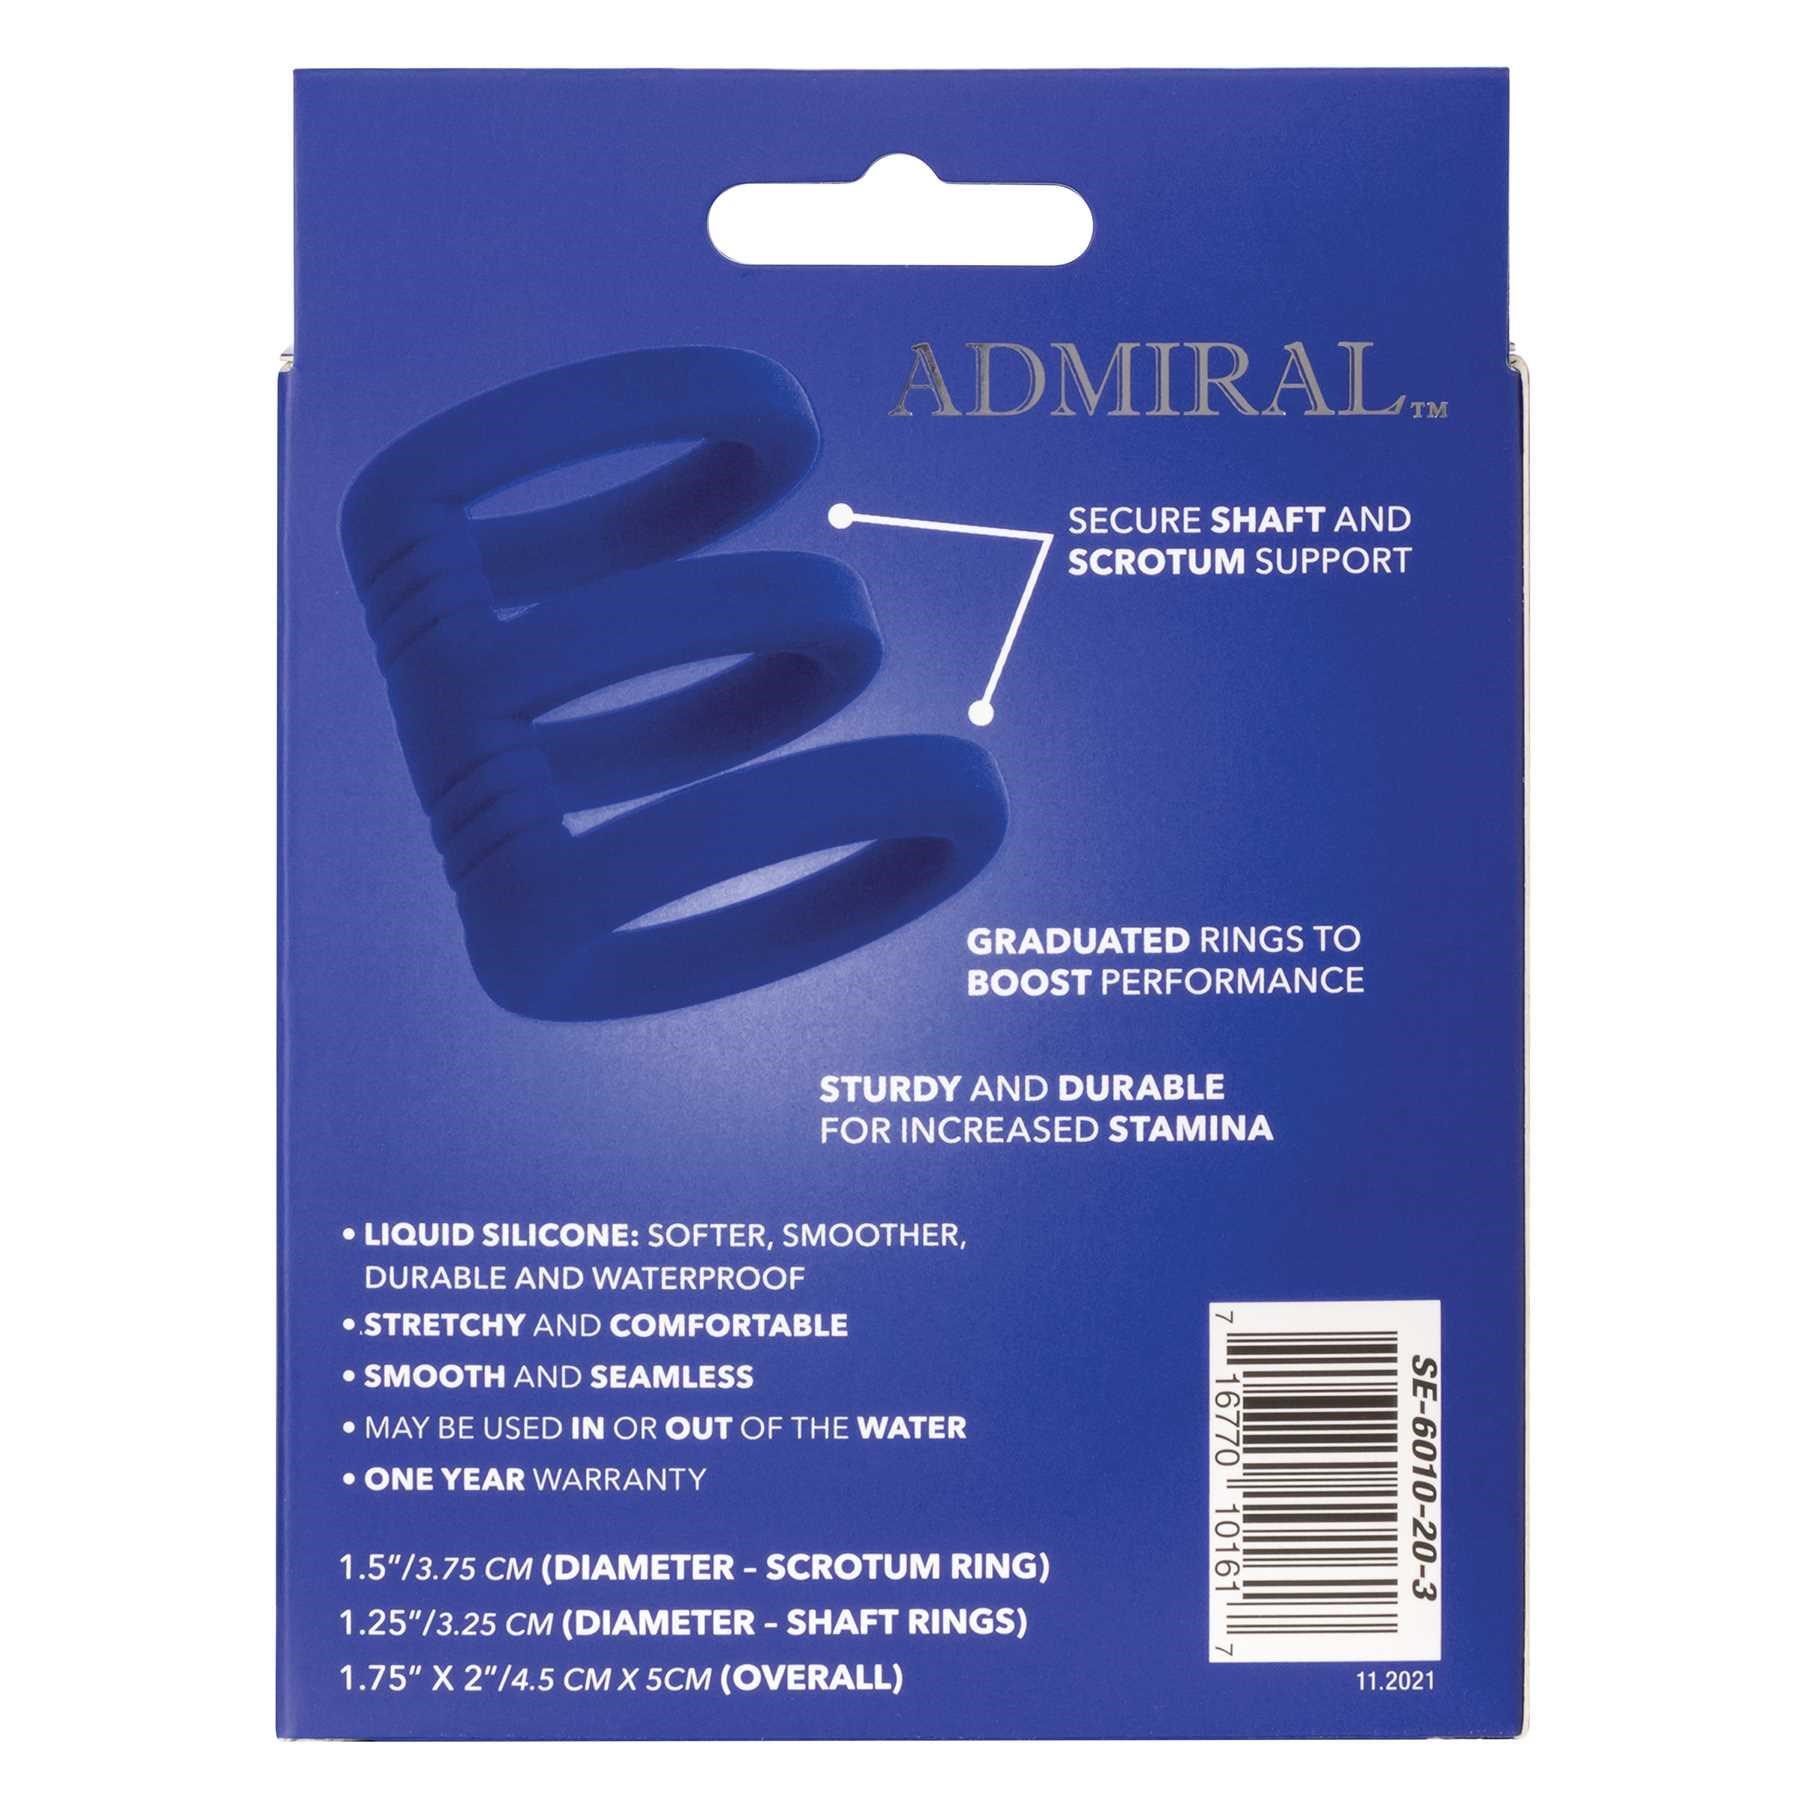 Admiral Triple Cock Cage packaging